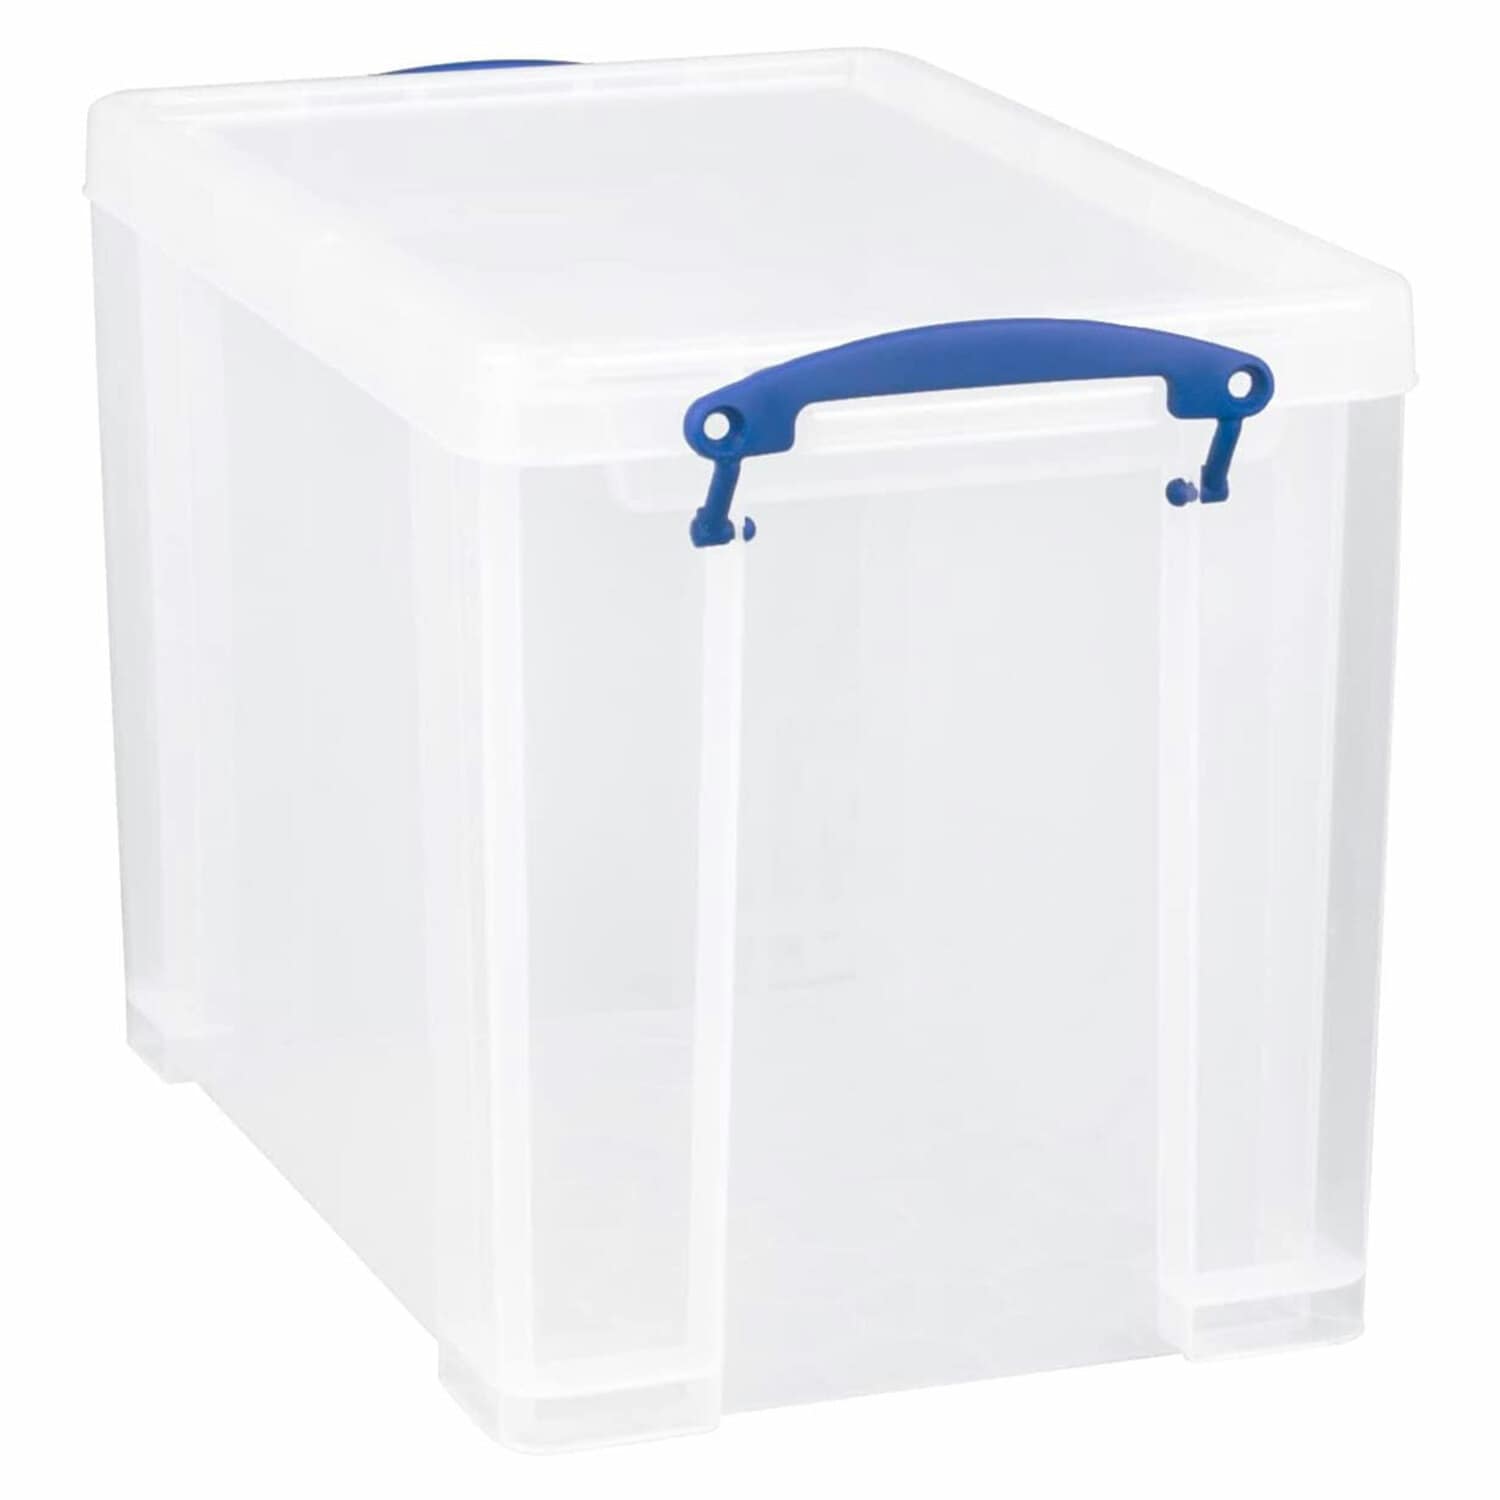 Simplify Plastic Storage Containers at